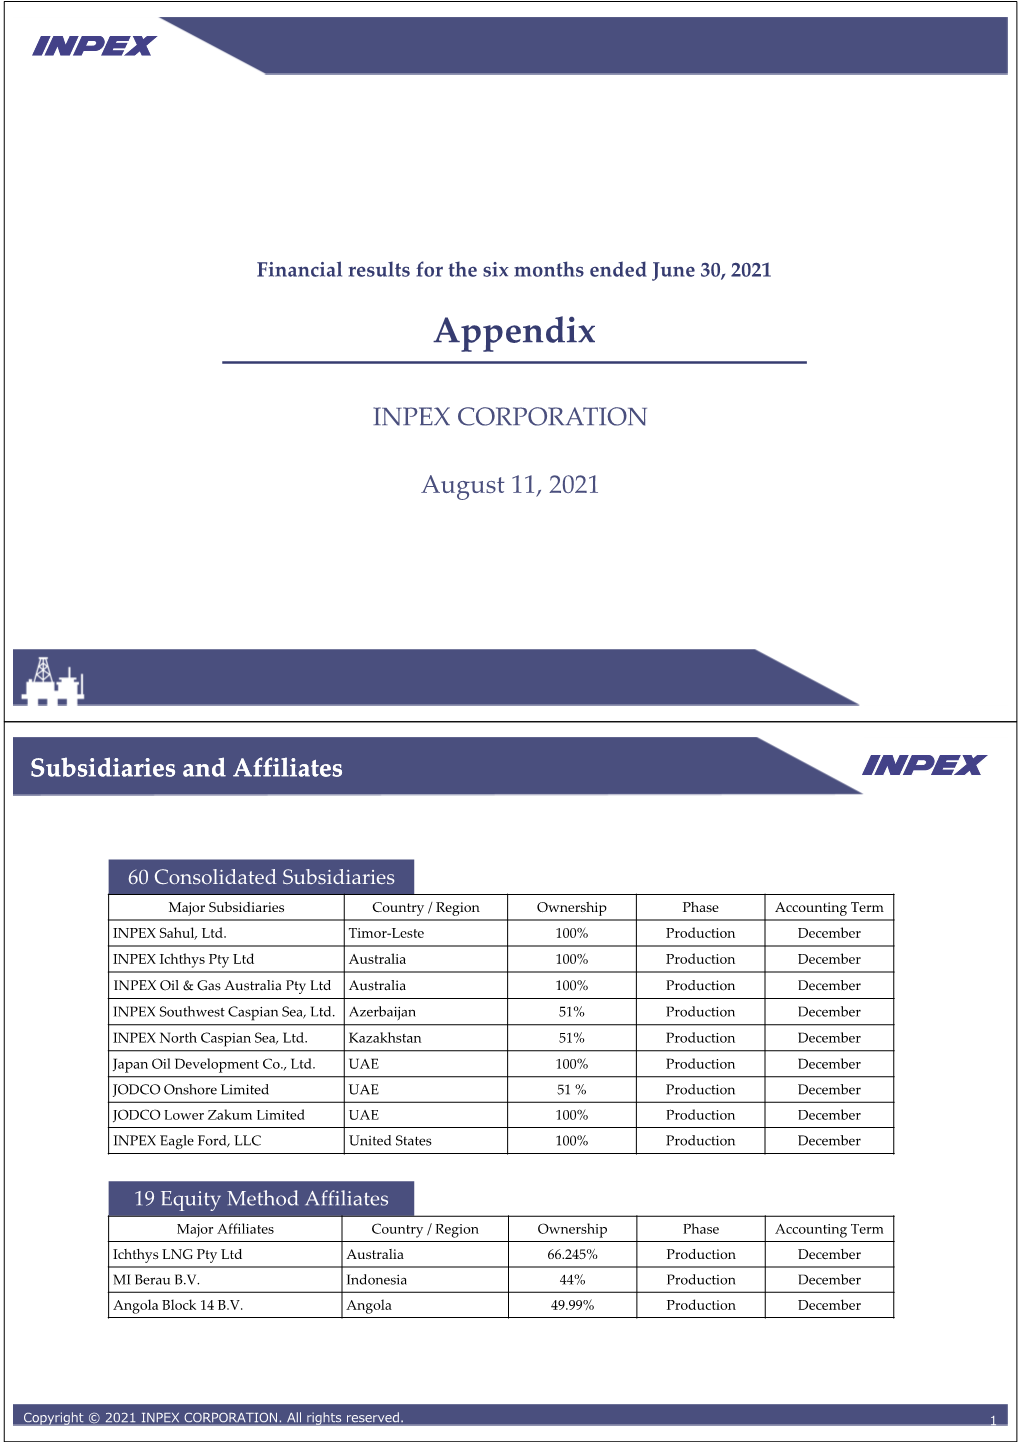 Financial Results for the Six Months Ended June 30, 2021 Appendix